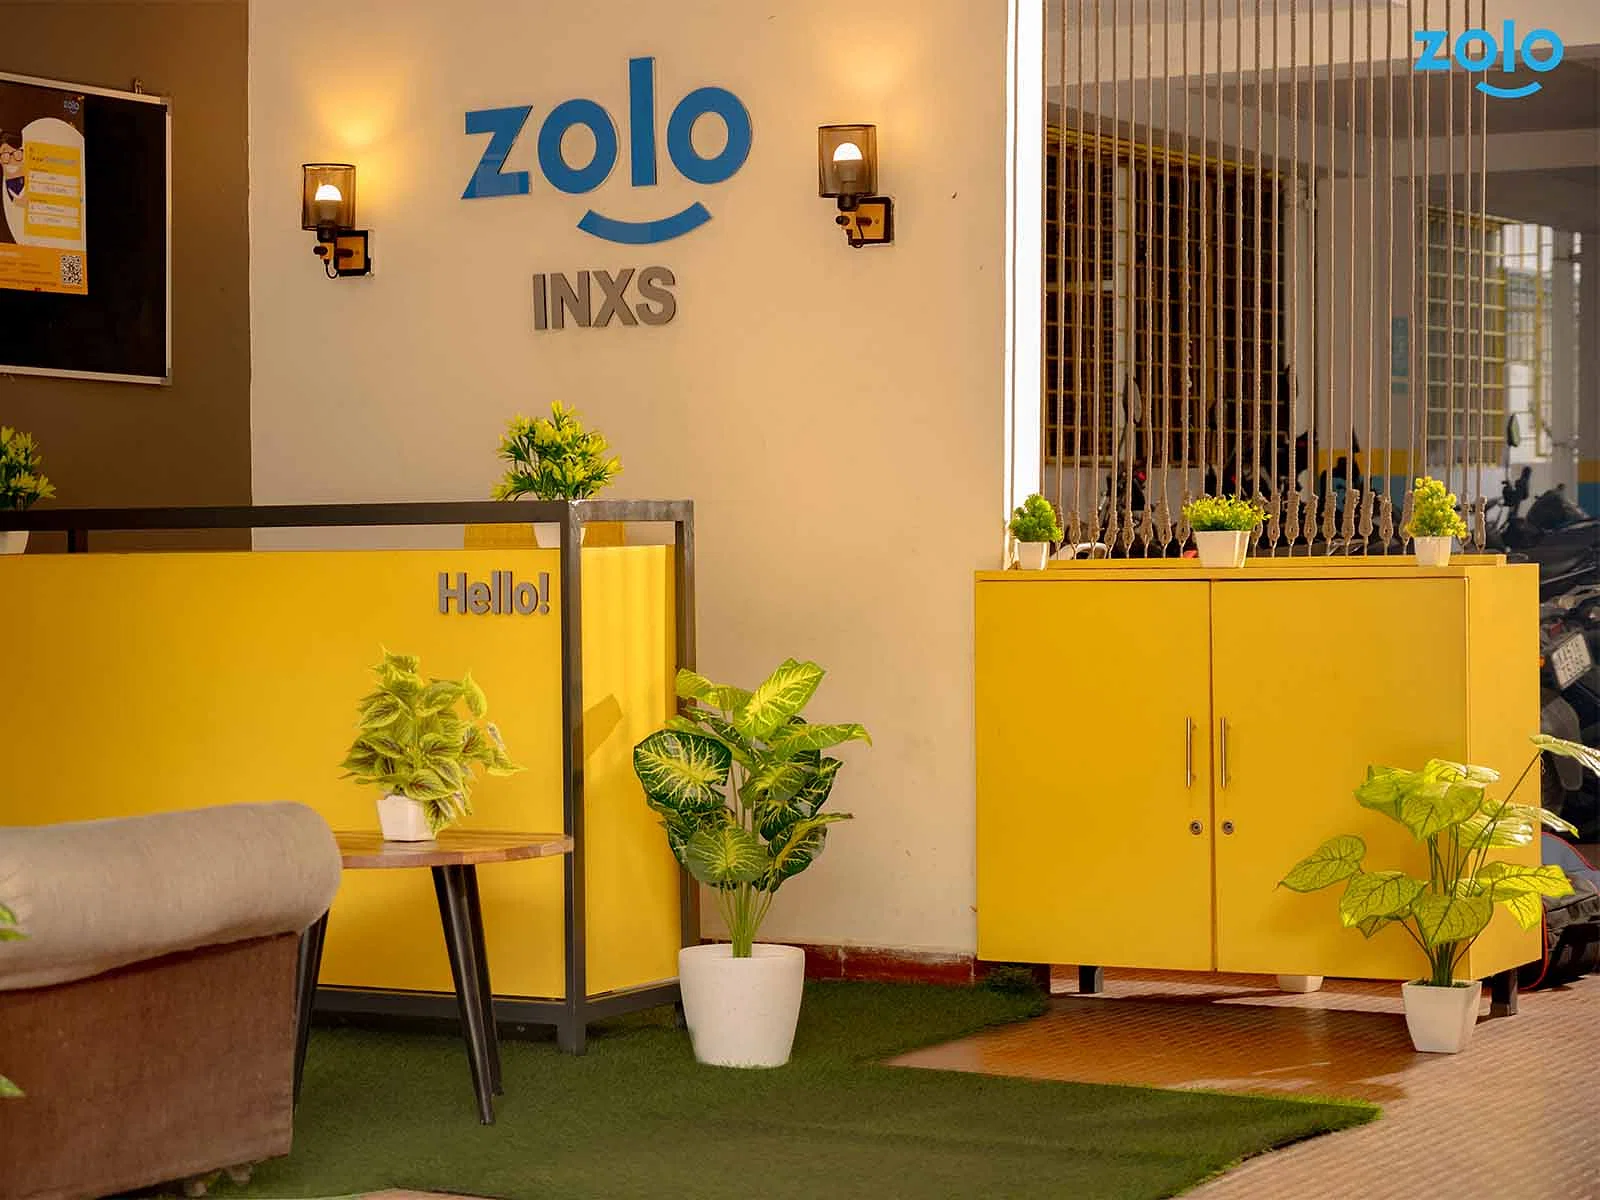 budget-friendly PGs and hostels for couple with single rooms with daily hopusekeeping-Zolo Inxs